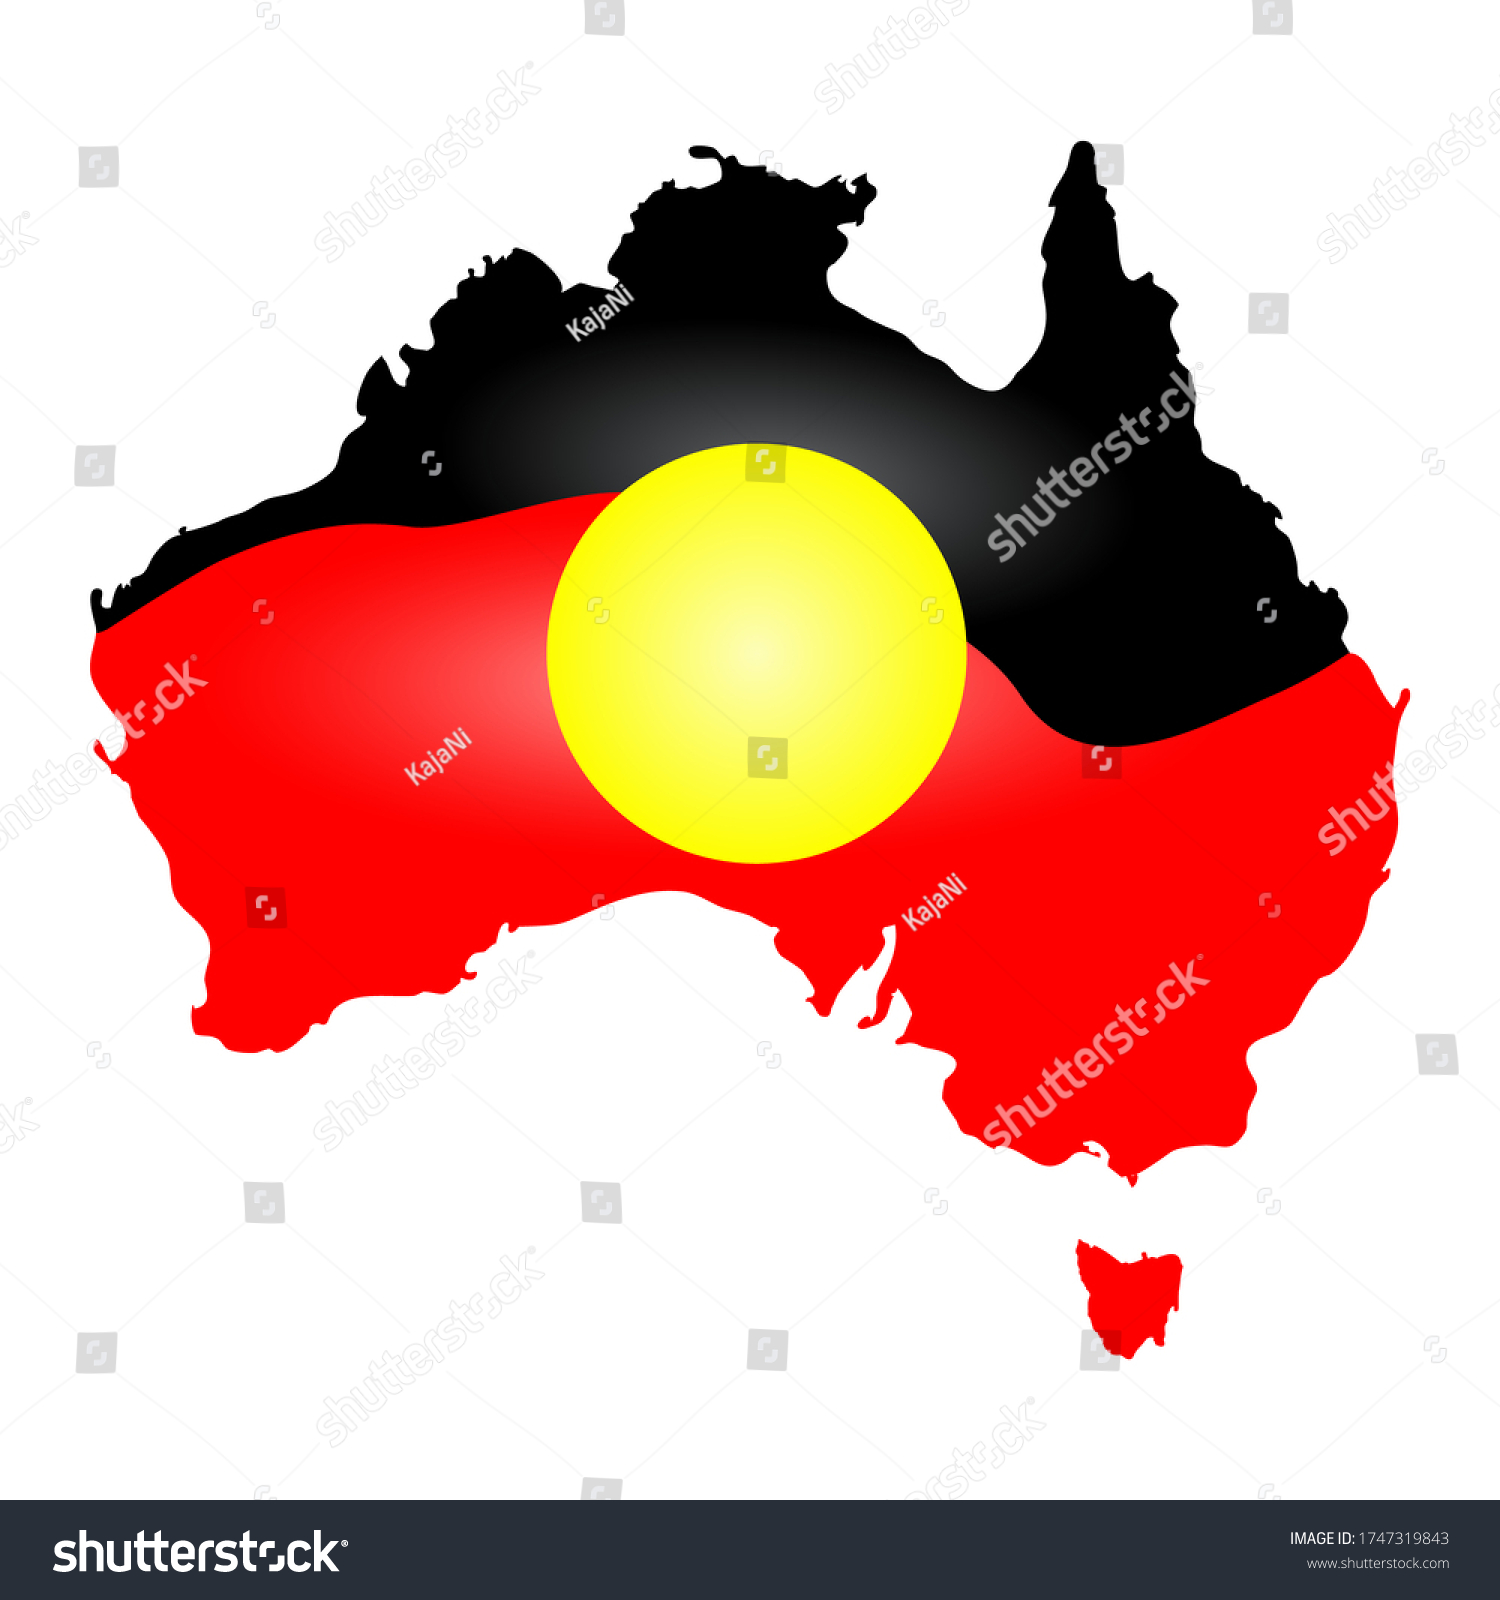 Australia Aboriginal Flag Map Continent Isolated Stock Vector (Royalty